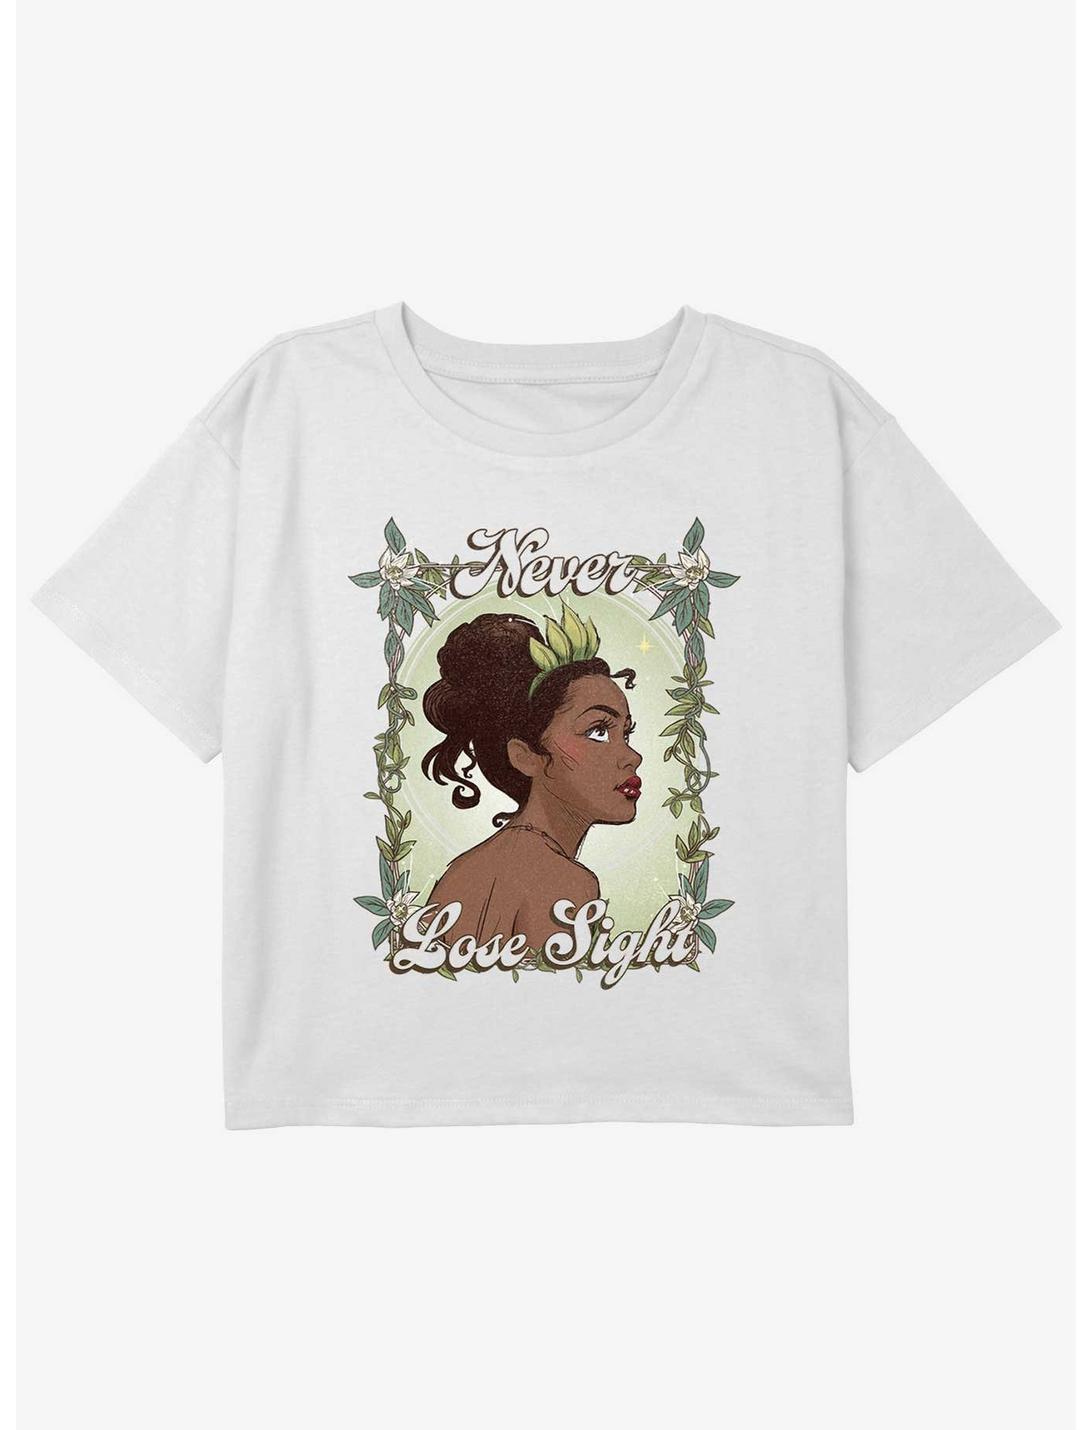 Disney The Princess and the Frog Tiana Never Lose Sight Girls Youth Crop T-Shirt, WHITE, hi-res